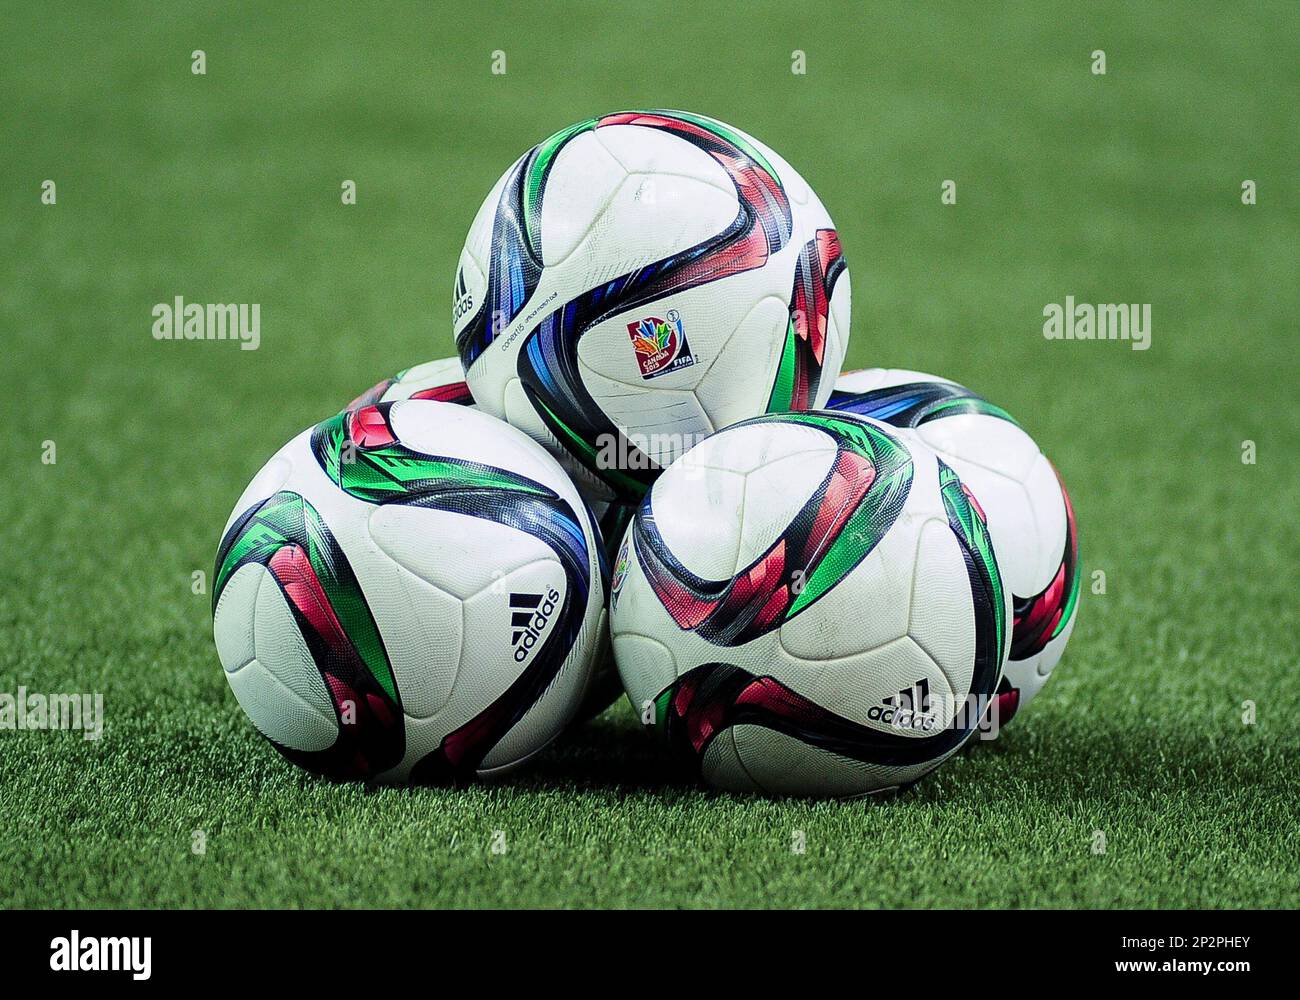 June 30, 2015: The official Adidas balls used during the FIFA Women's World  Cup Semi-Final match between USA and Germany at the Olympic Stadium in  Montreal, Canada. USA booked their place in